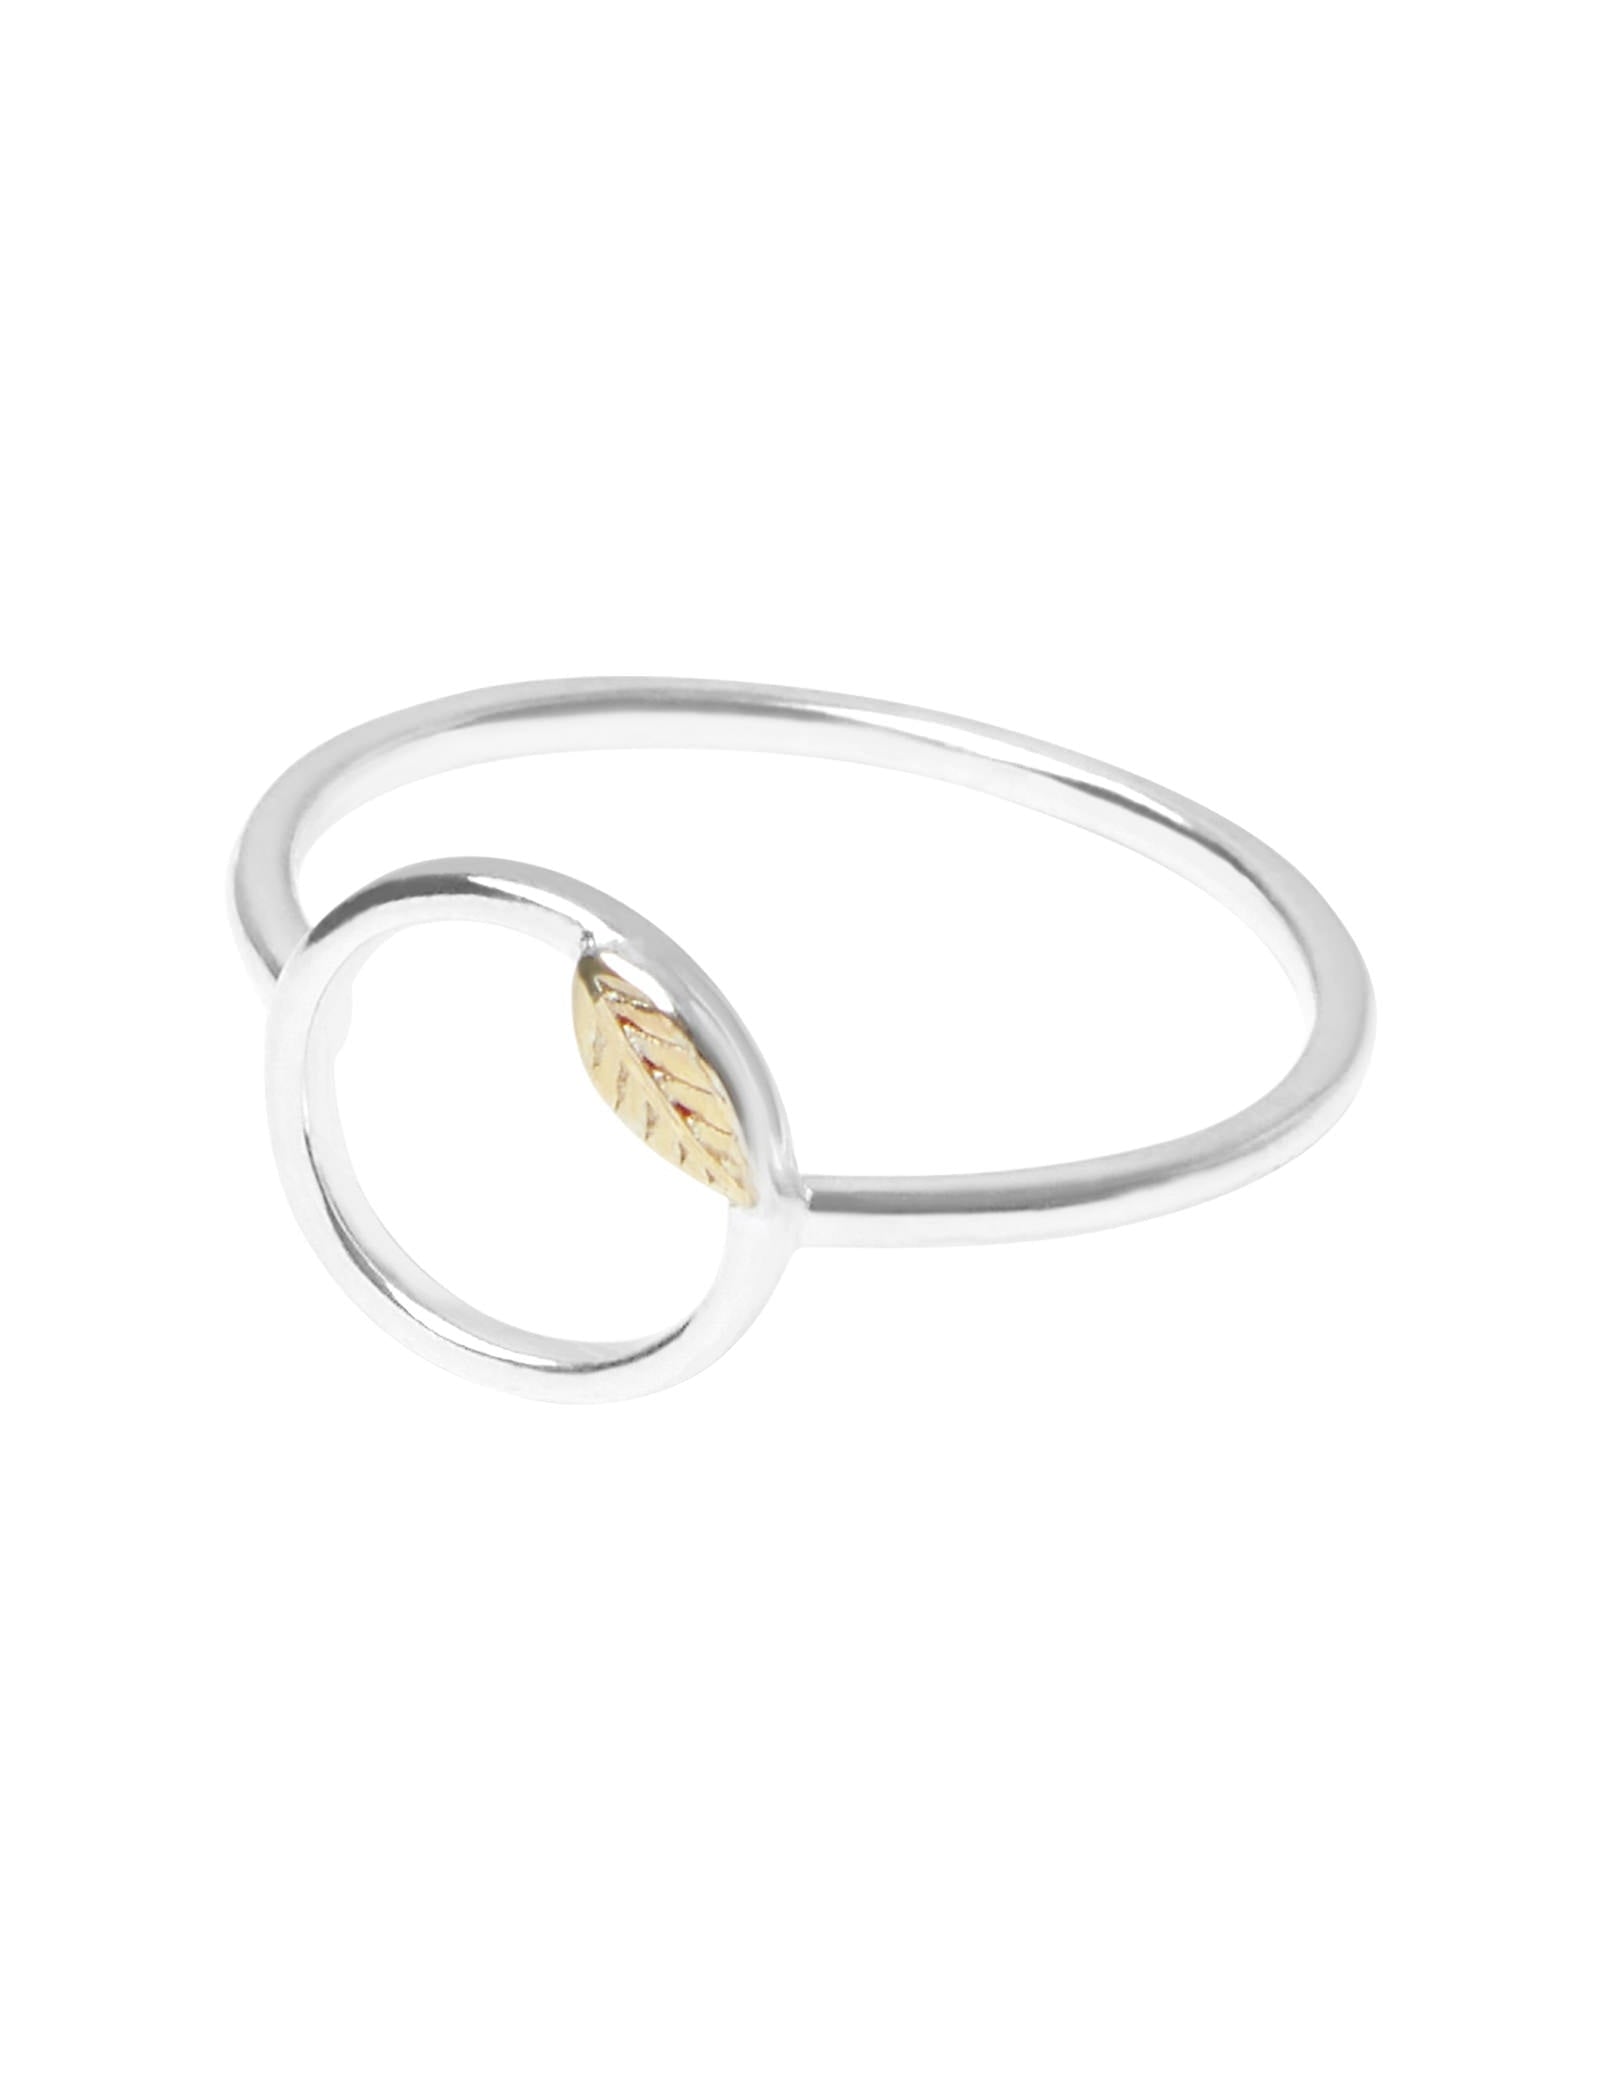 Pastiche  Spring Breeze Ring -